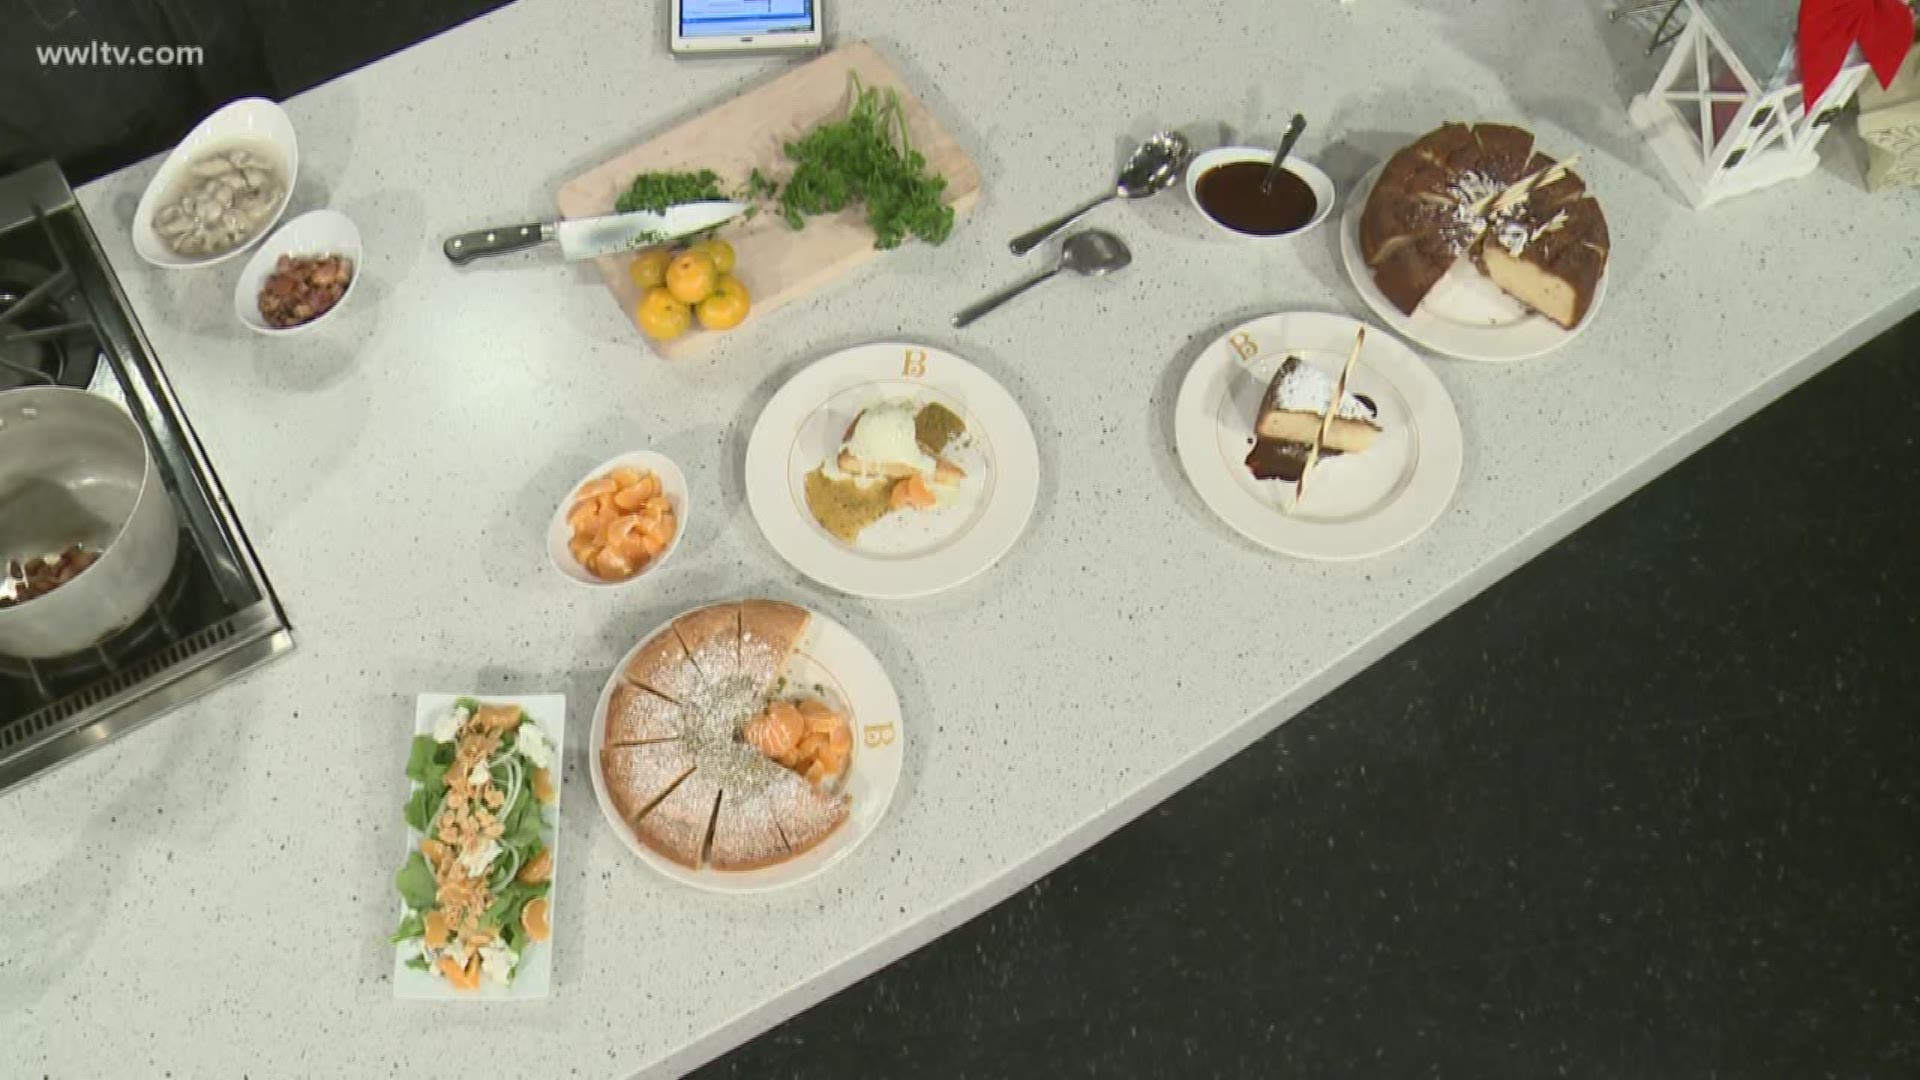 Broussard's is added to the long list of restaurants offering the traditional Christmas meal and Chef Jimi Setchim is in giving us a look at the menu.